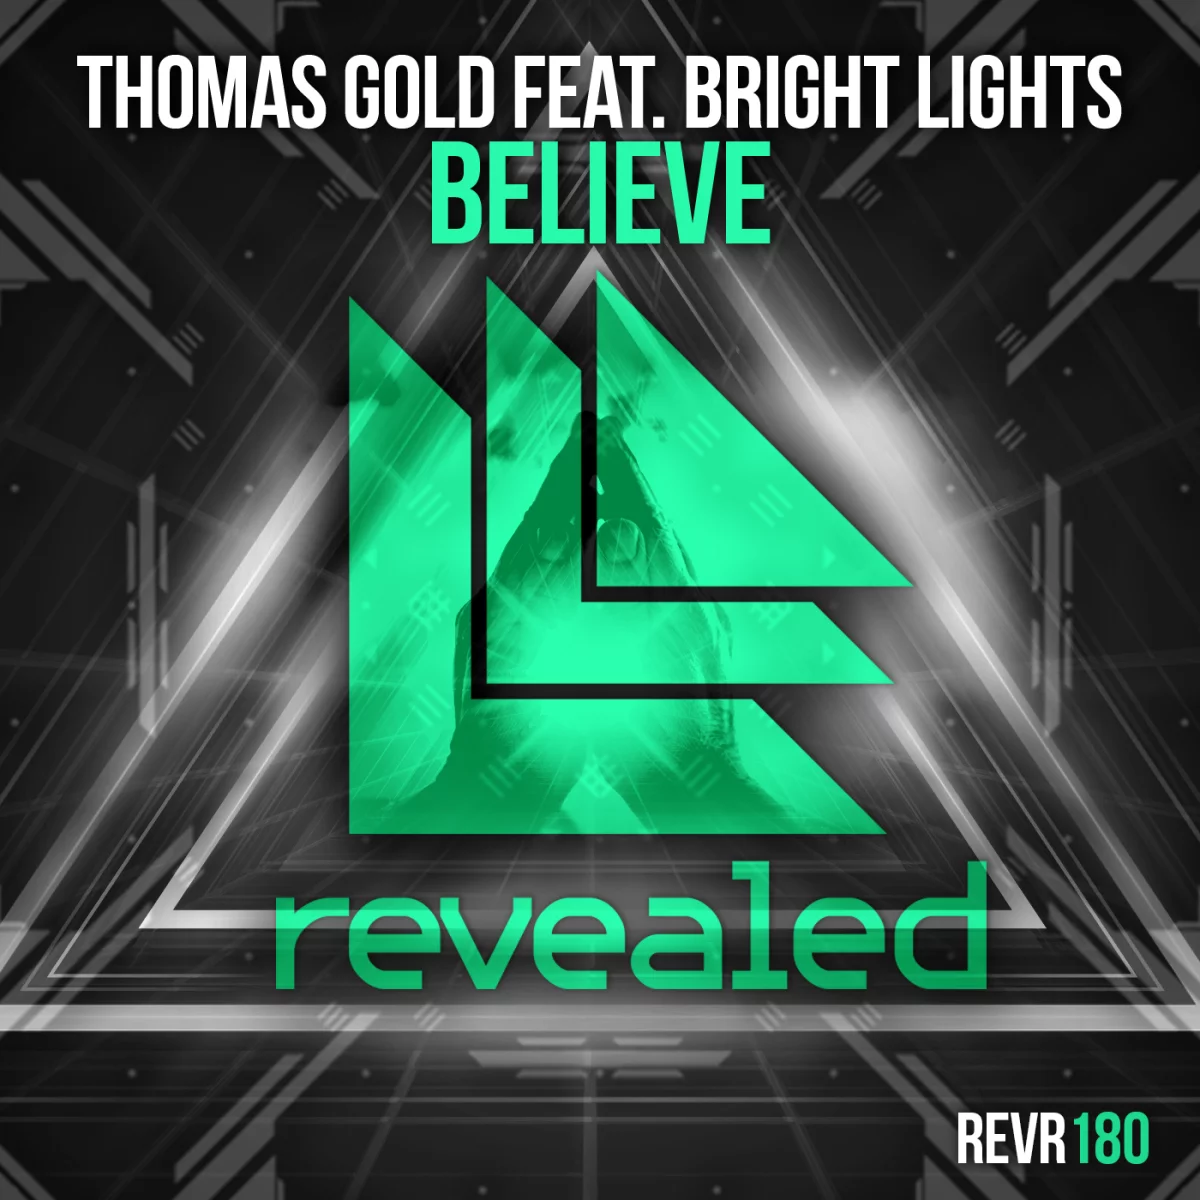 Believe - Thomas Gold feat. Bright Lights